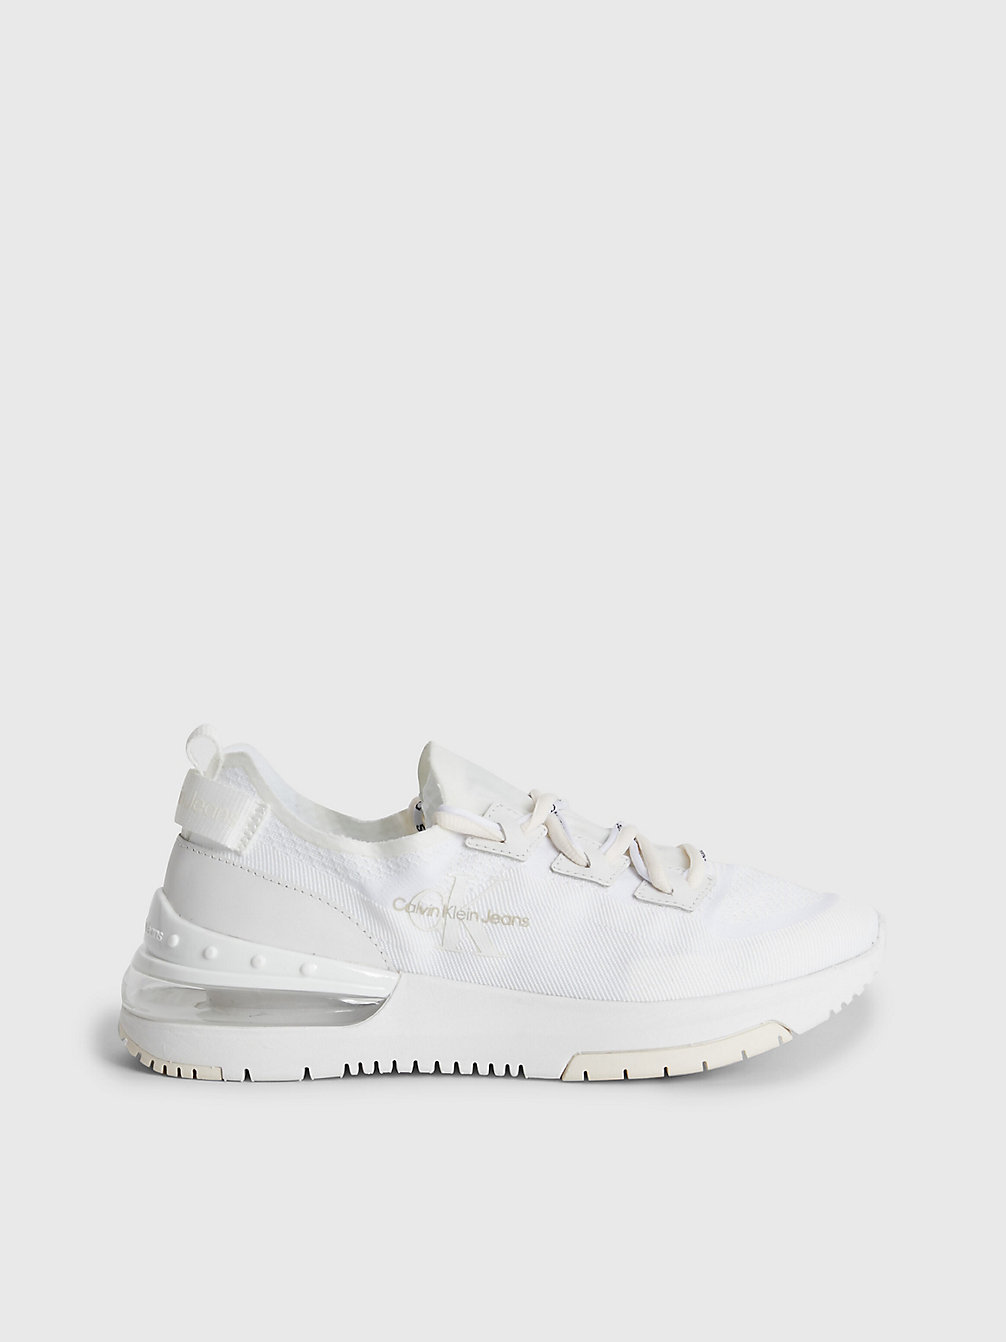 TRIPLE WHITE Recycled Knit Trainers undefined women Calvin Klein